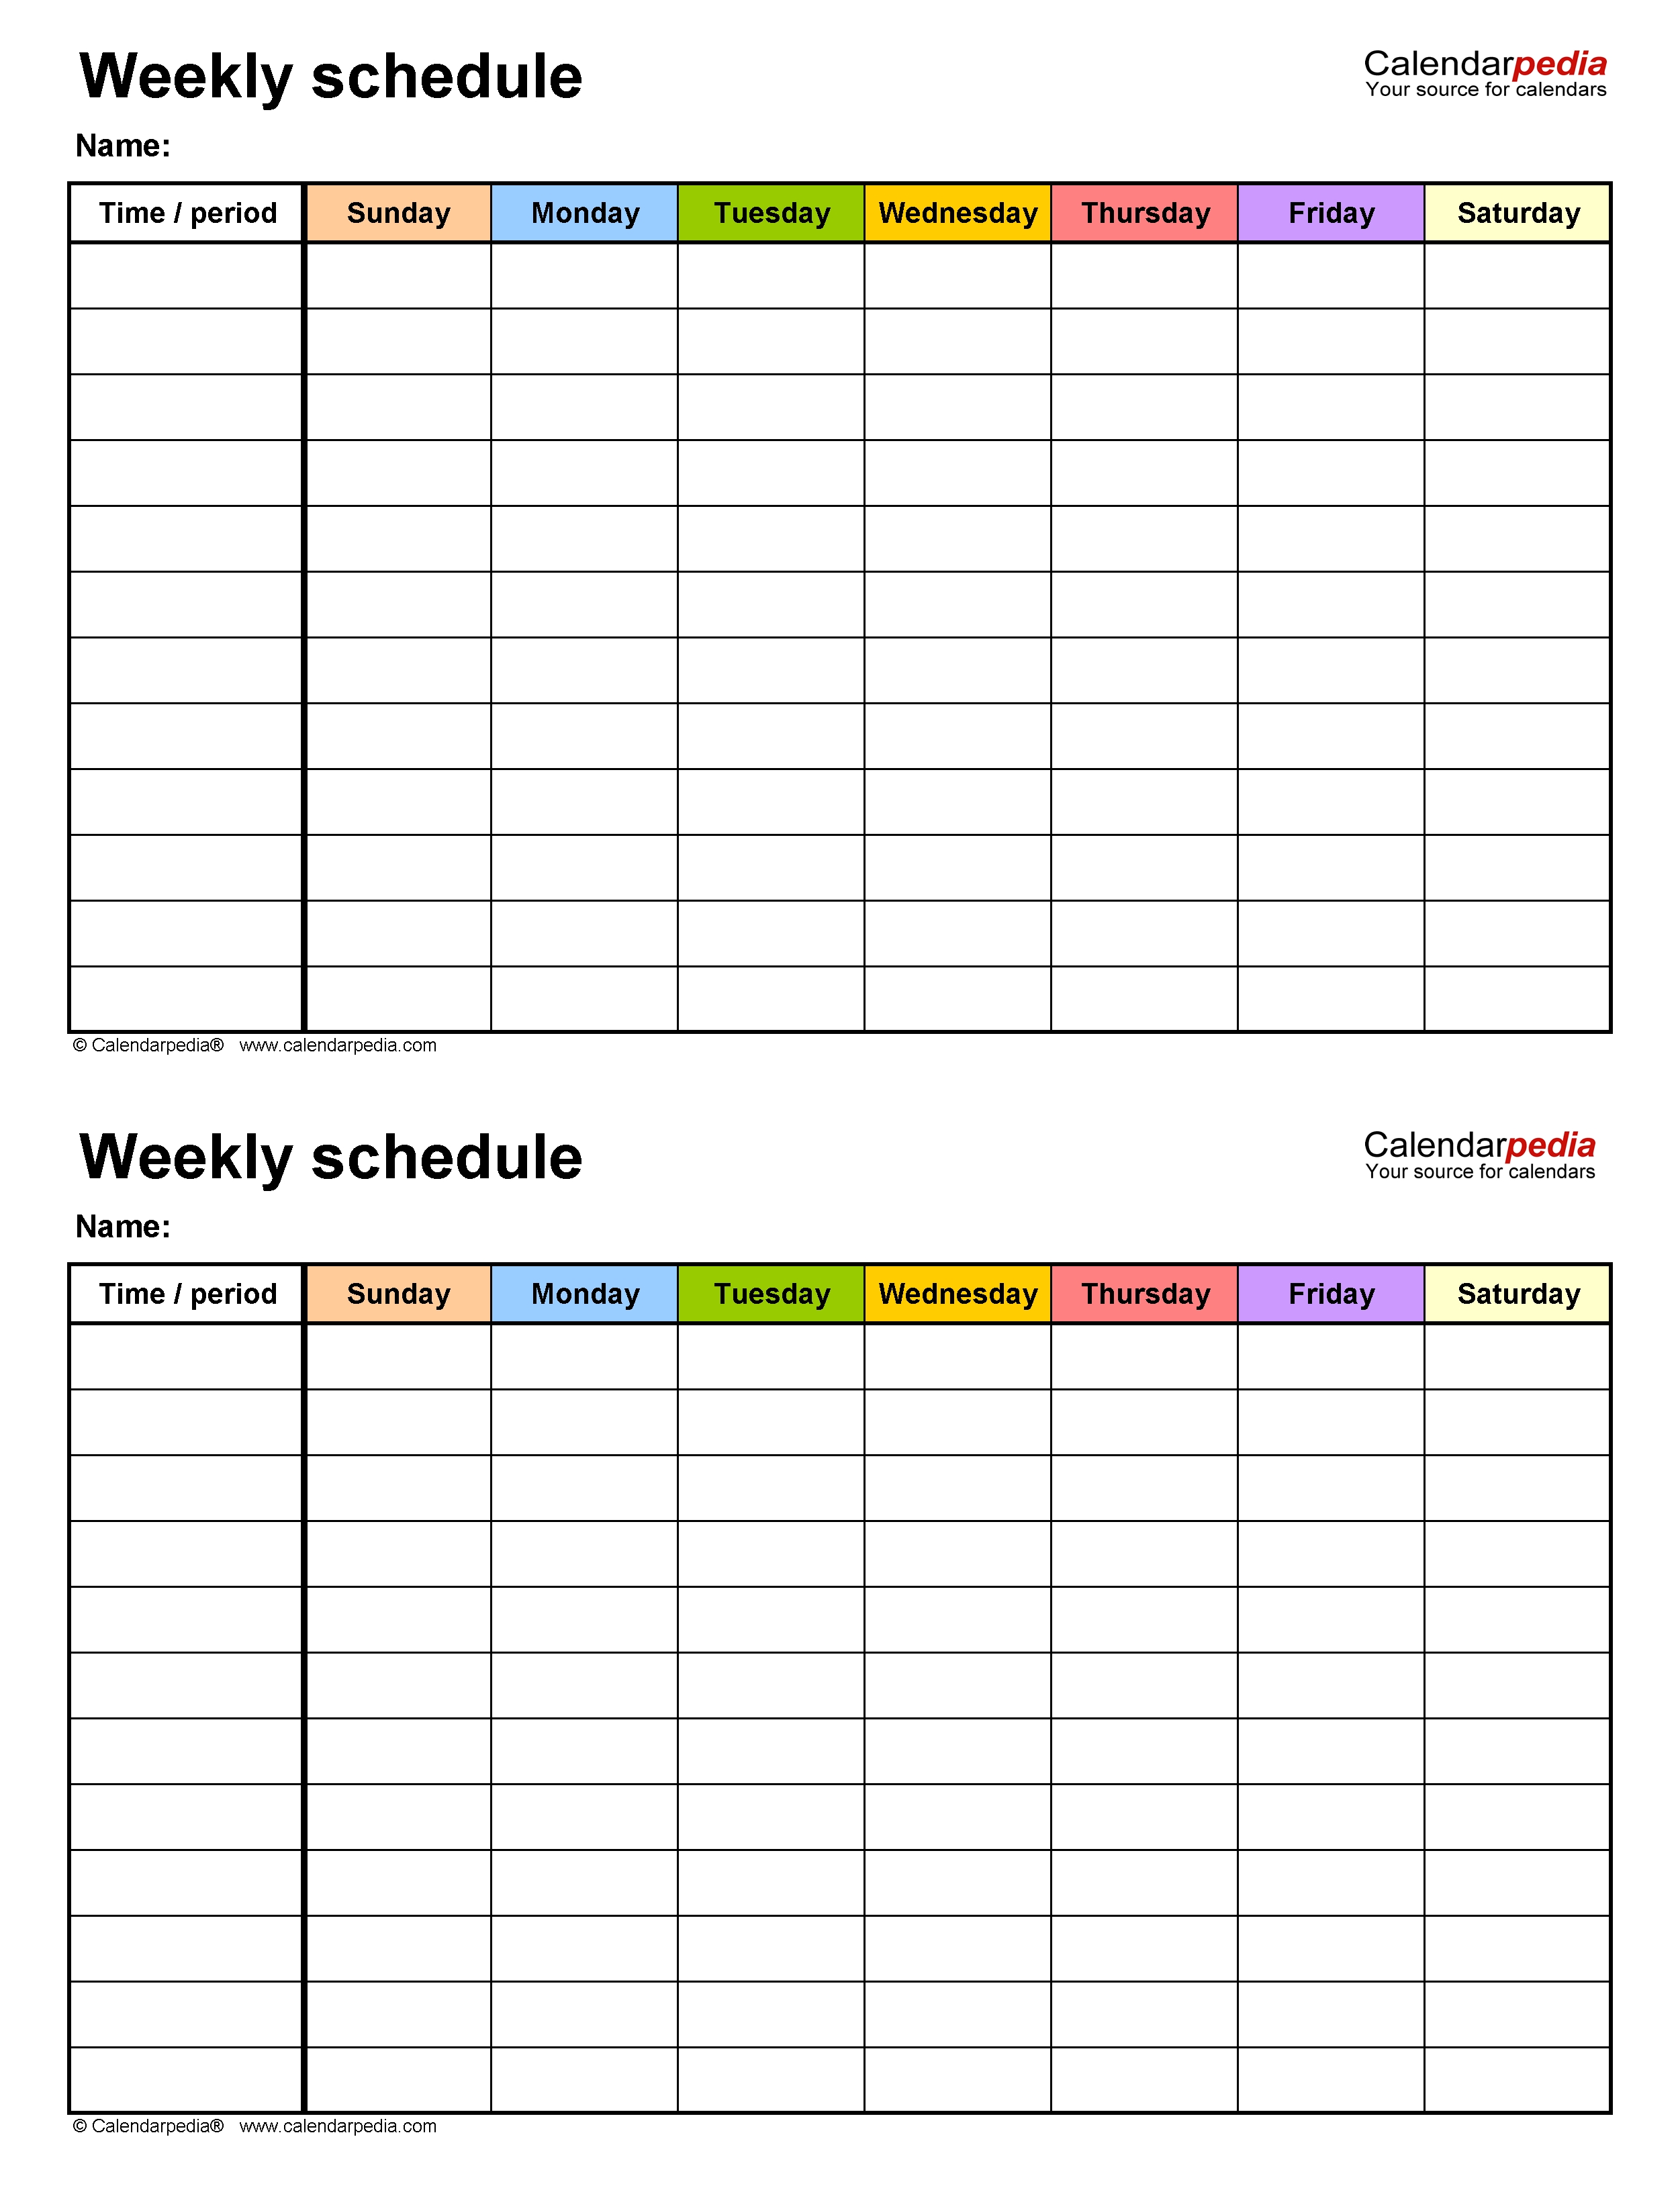 Free Weekly Schedule Templates For Word - 18 Templates 7 Day Week Calendar Template